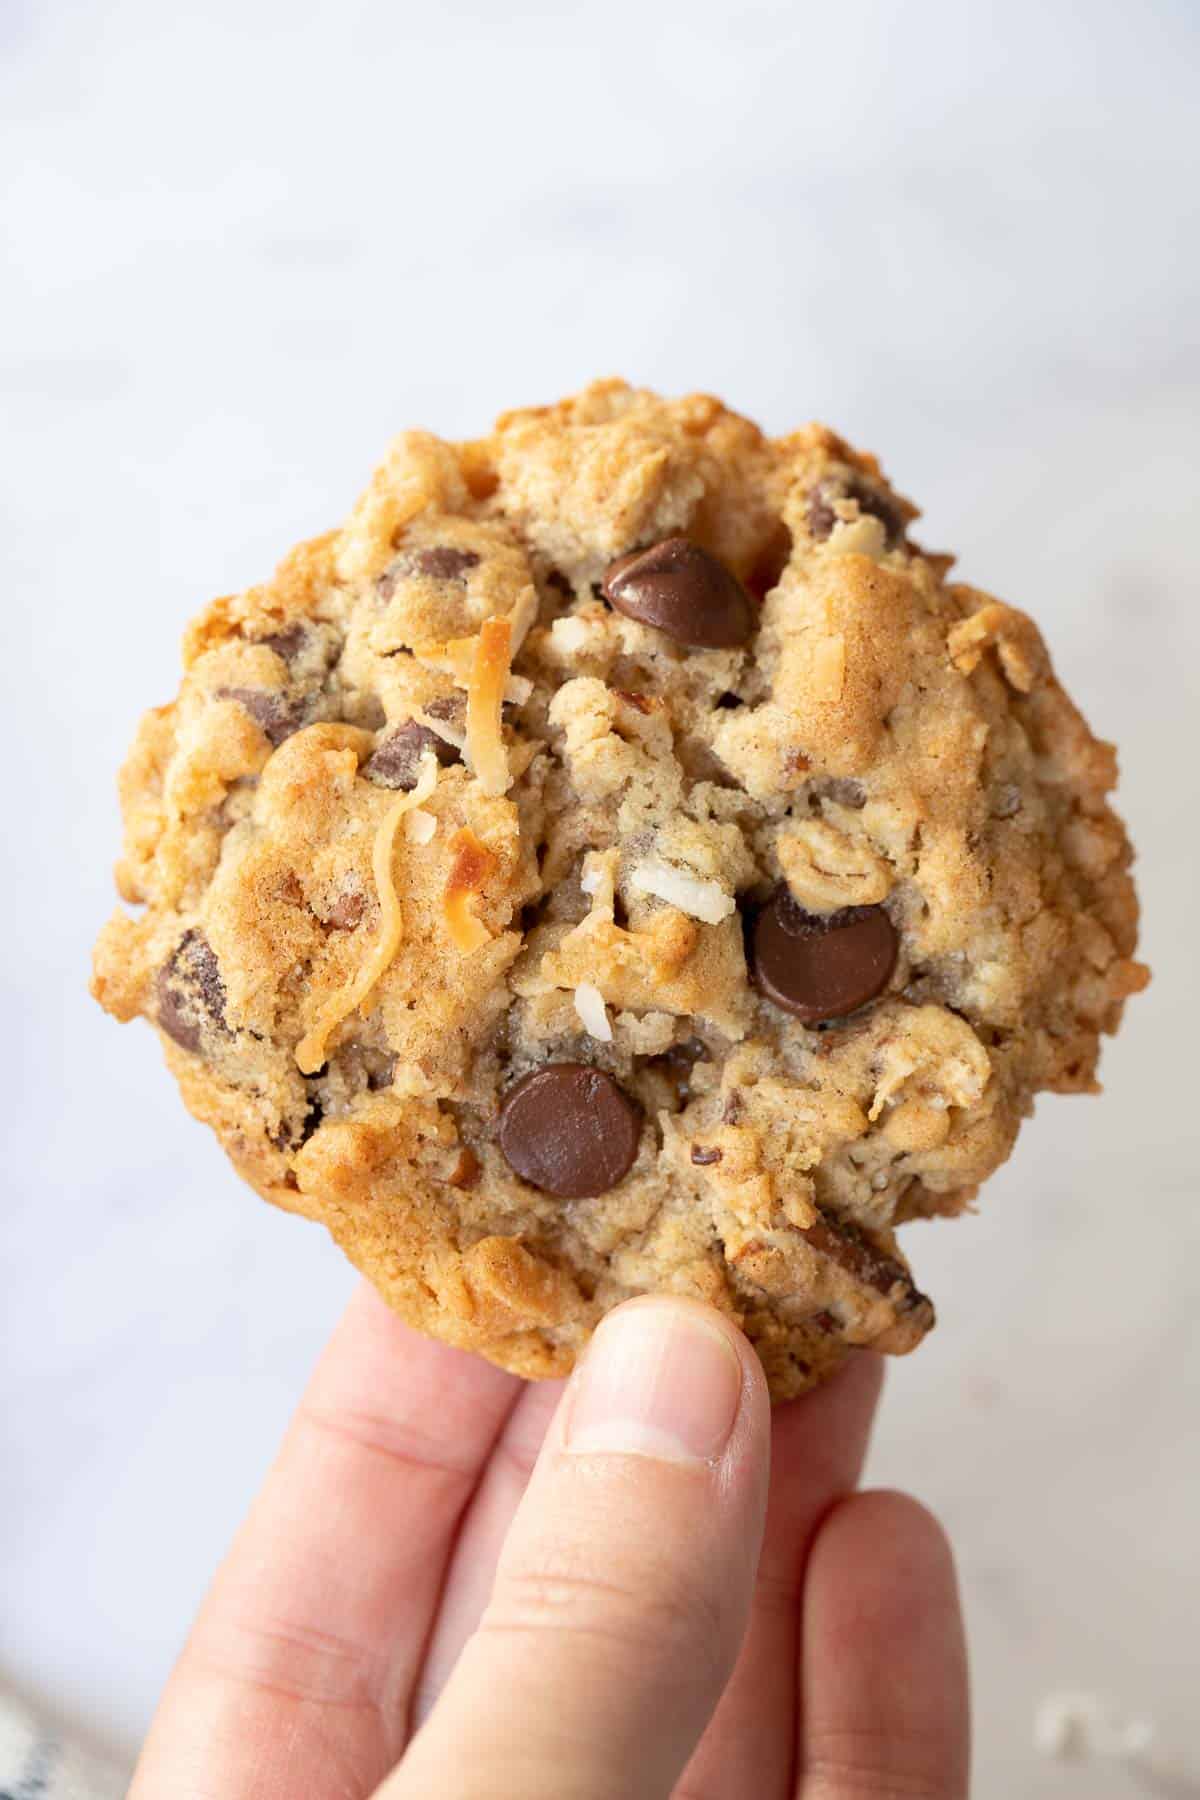 Hand holding a chunky chocolate chip cookie with coconut and pecans.